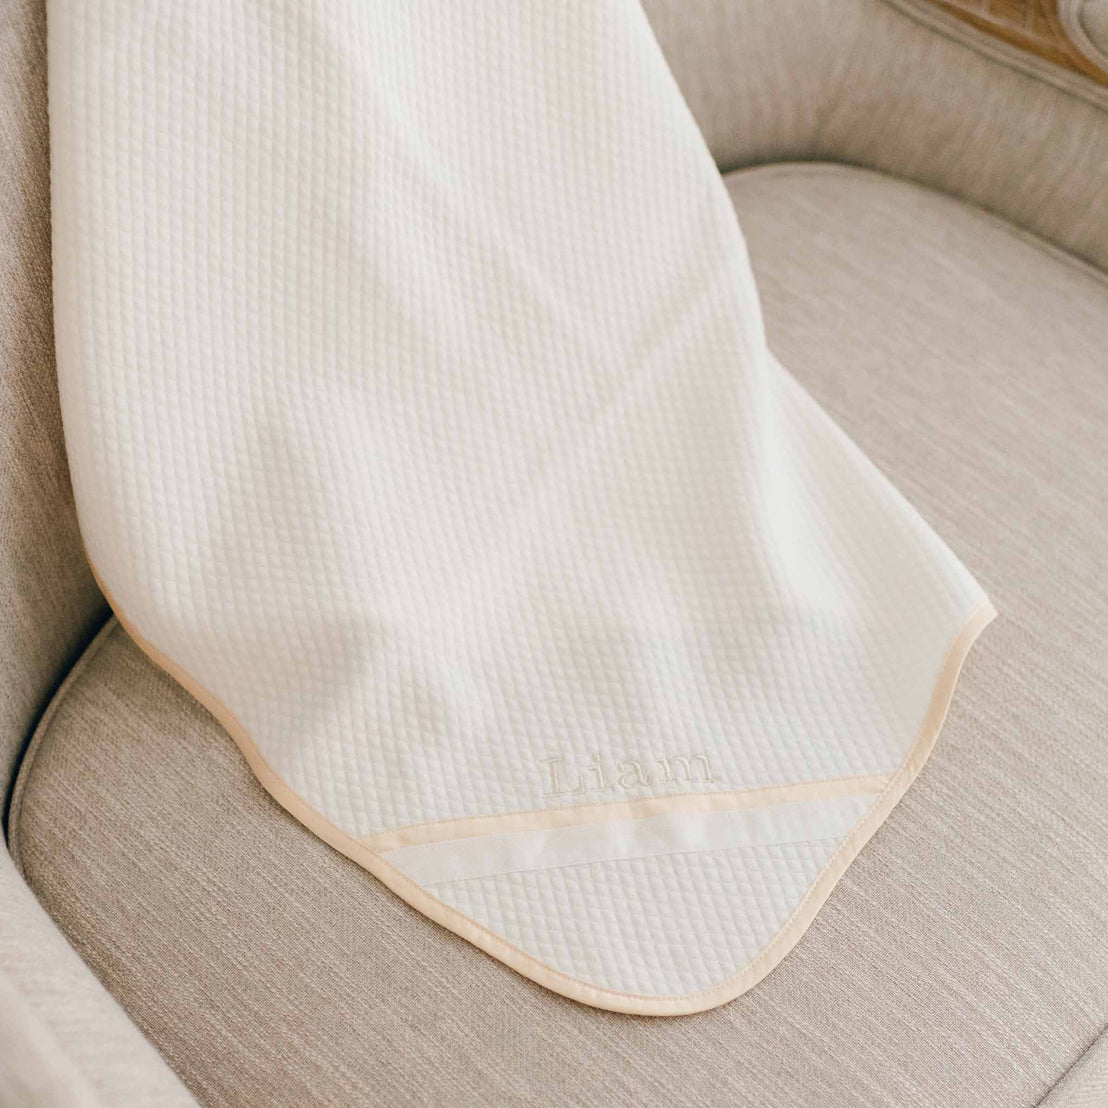 Flat lay of the Liam Personalized Blanket made with a soft ivory quilted cotton and champagne trim. Embroidered on the corner of the blanket is the name "Liam"